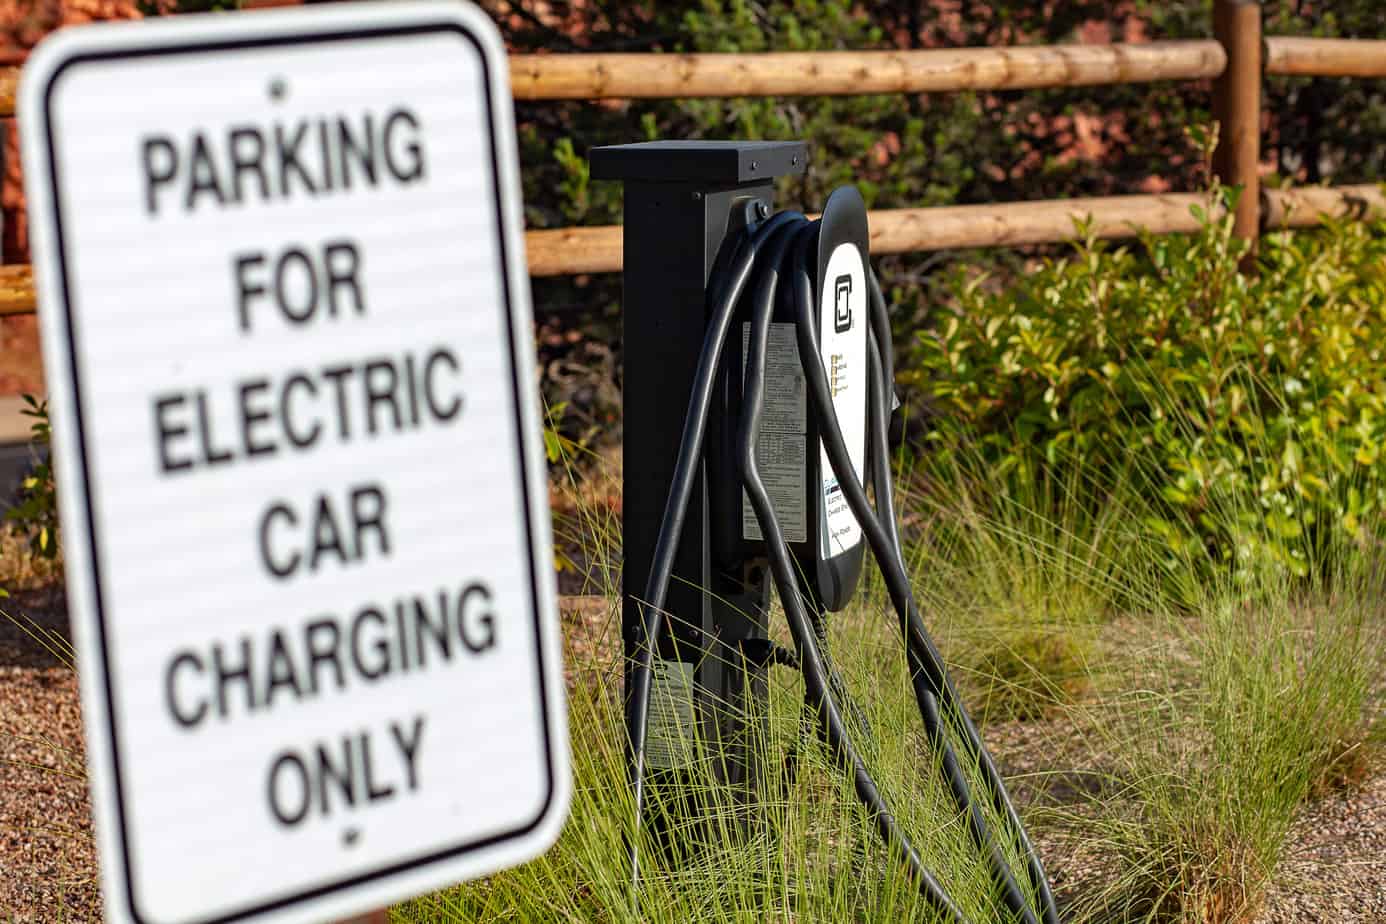 APS to install charging sites for electric cars Sedona Red Rock News